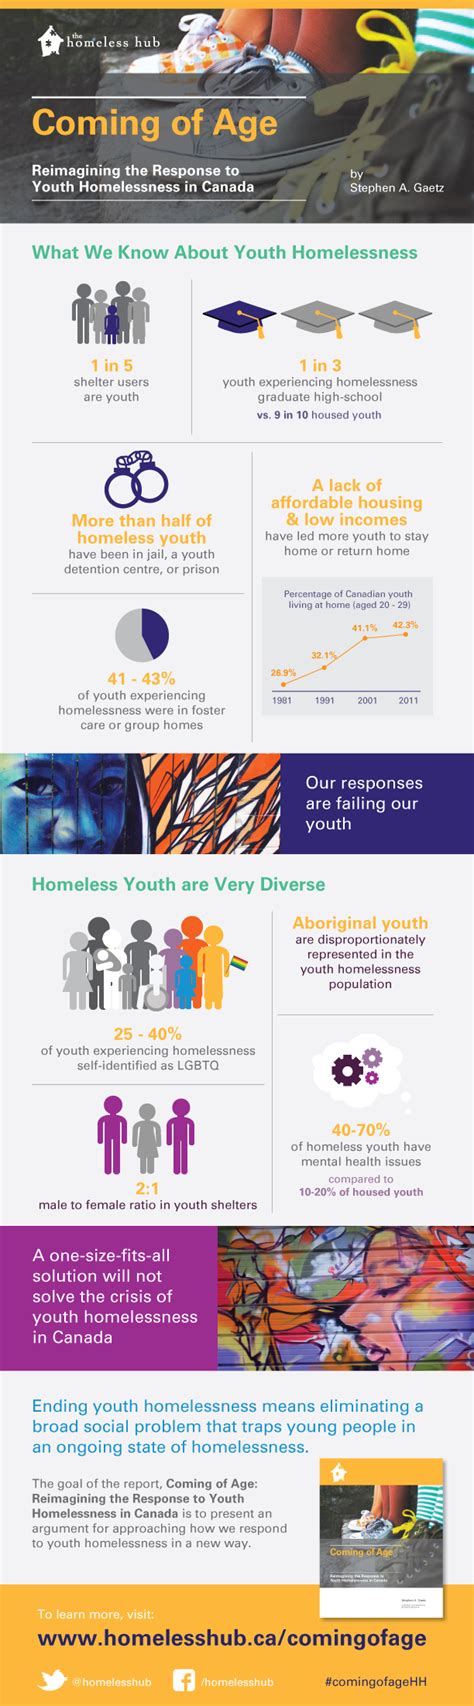 coming of age reimagining the response to youth homelessness in canada the homeless hub